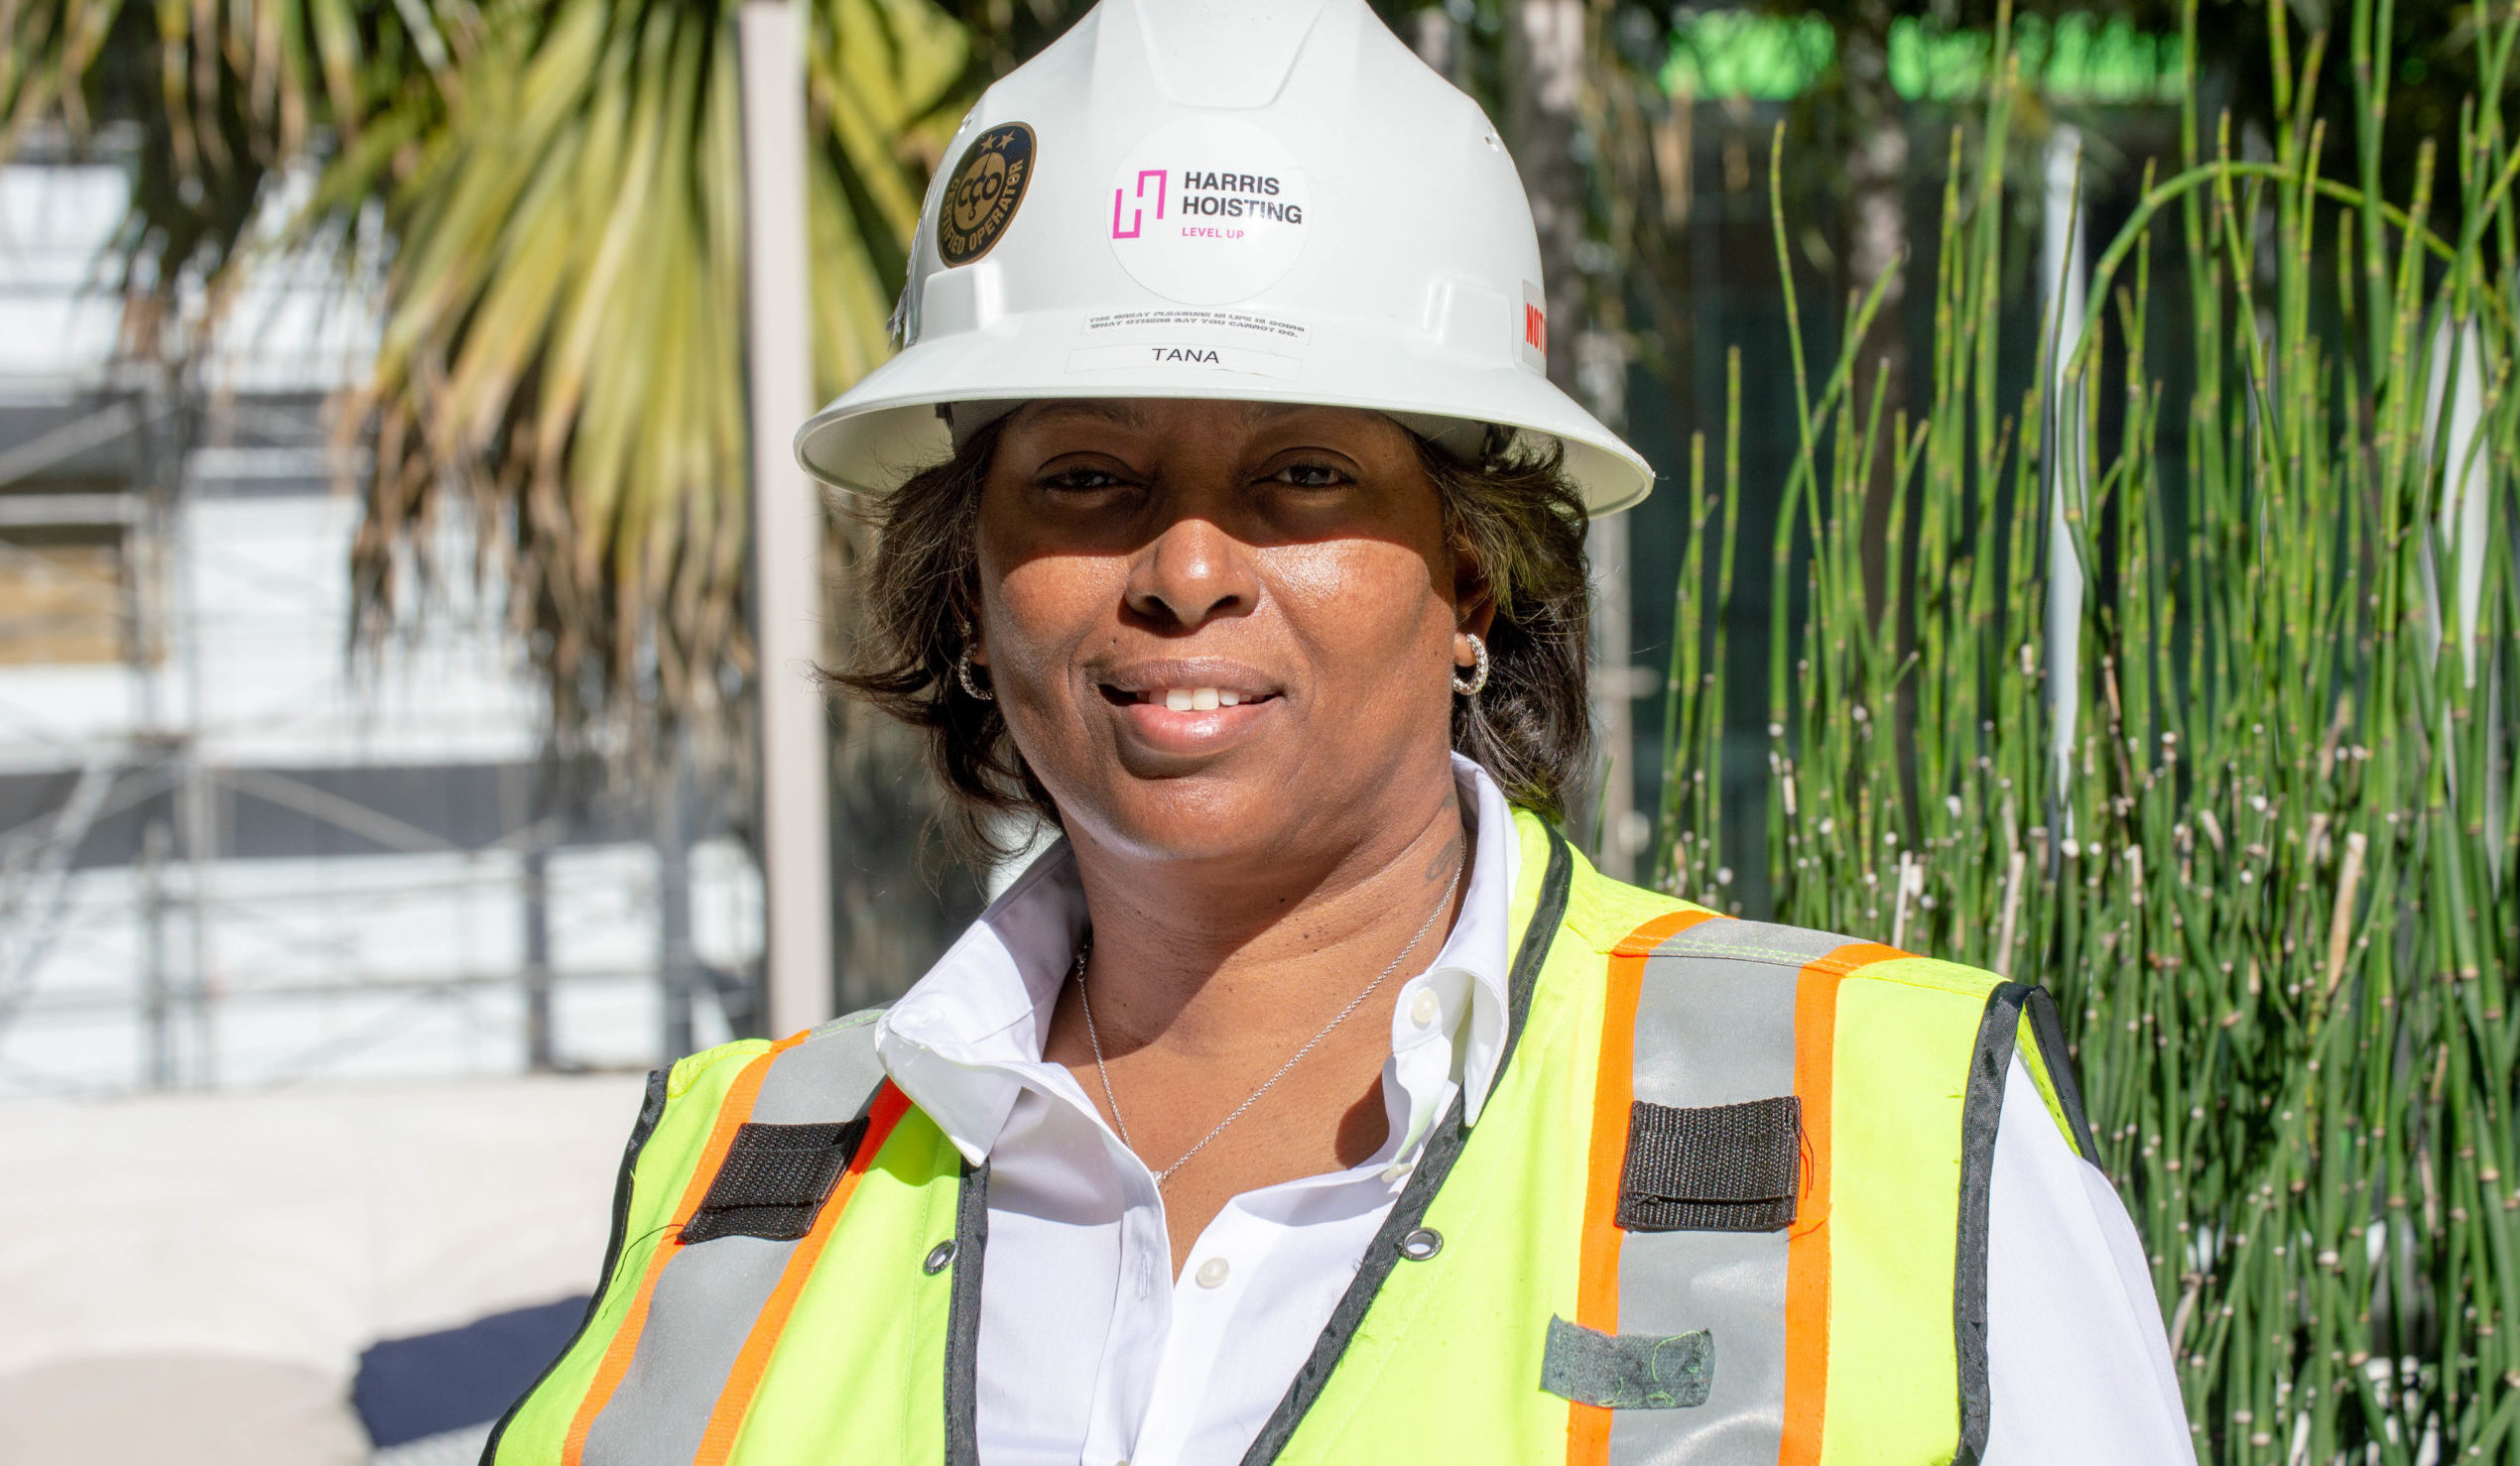 She Builds California: Q&A with Operating Engineer, Tana Harris - Build ...